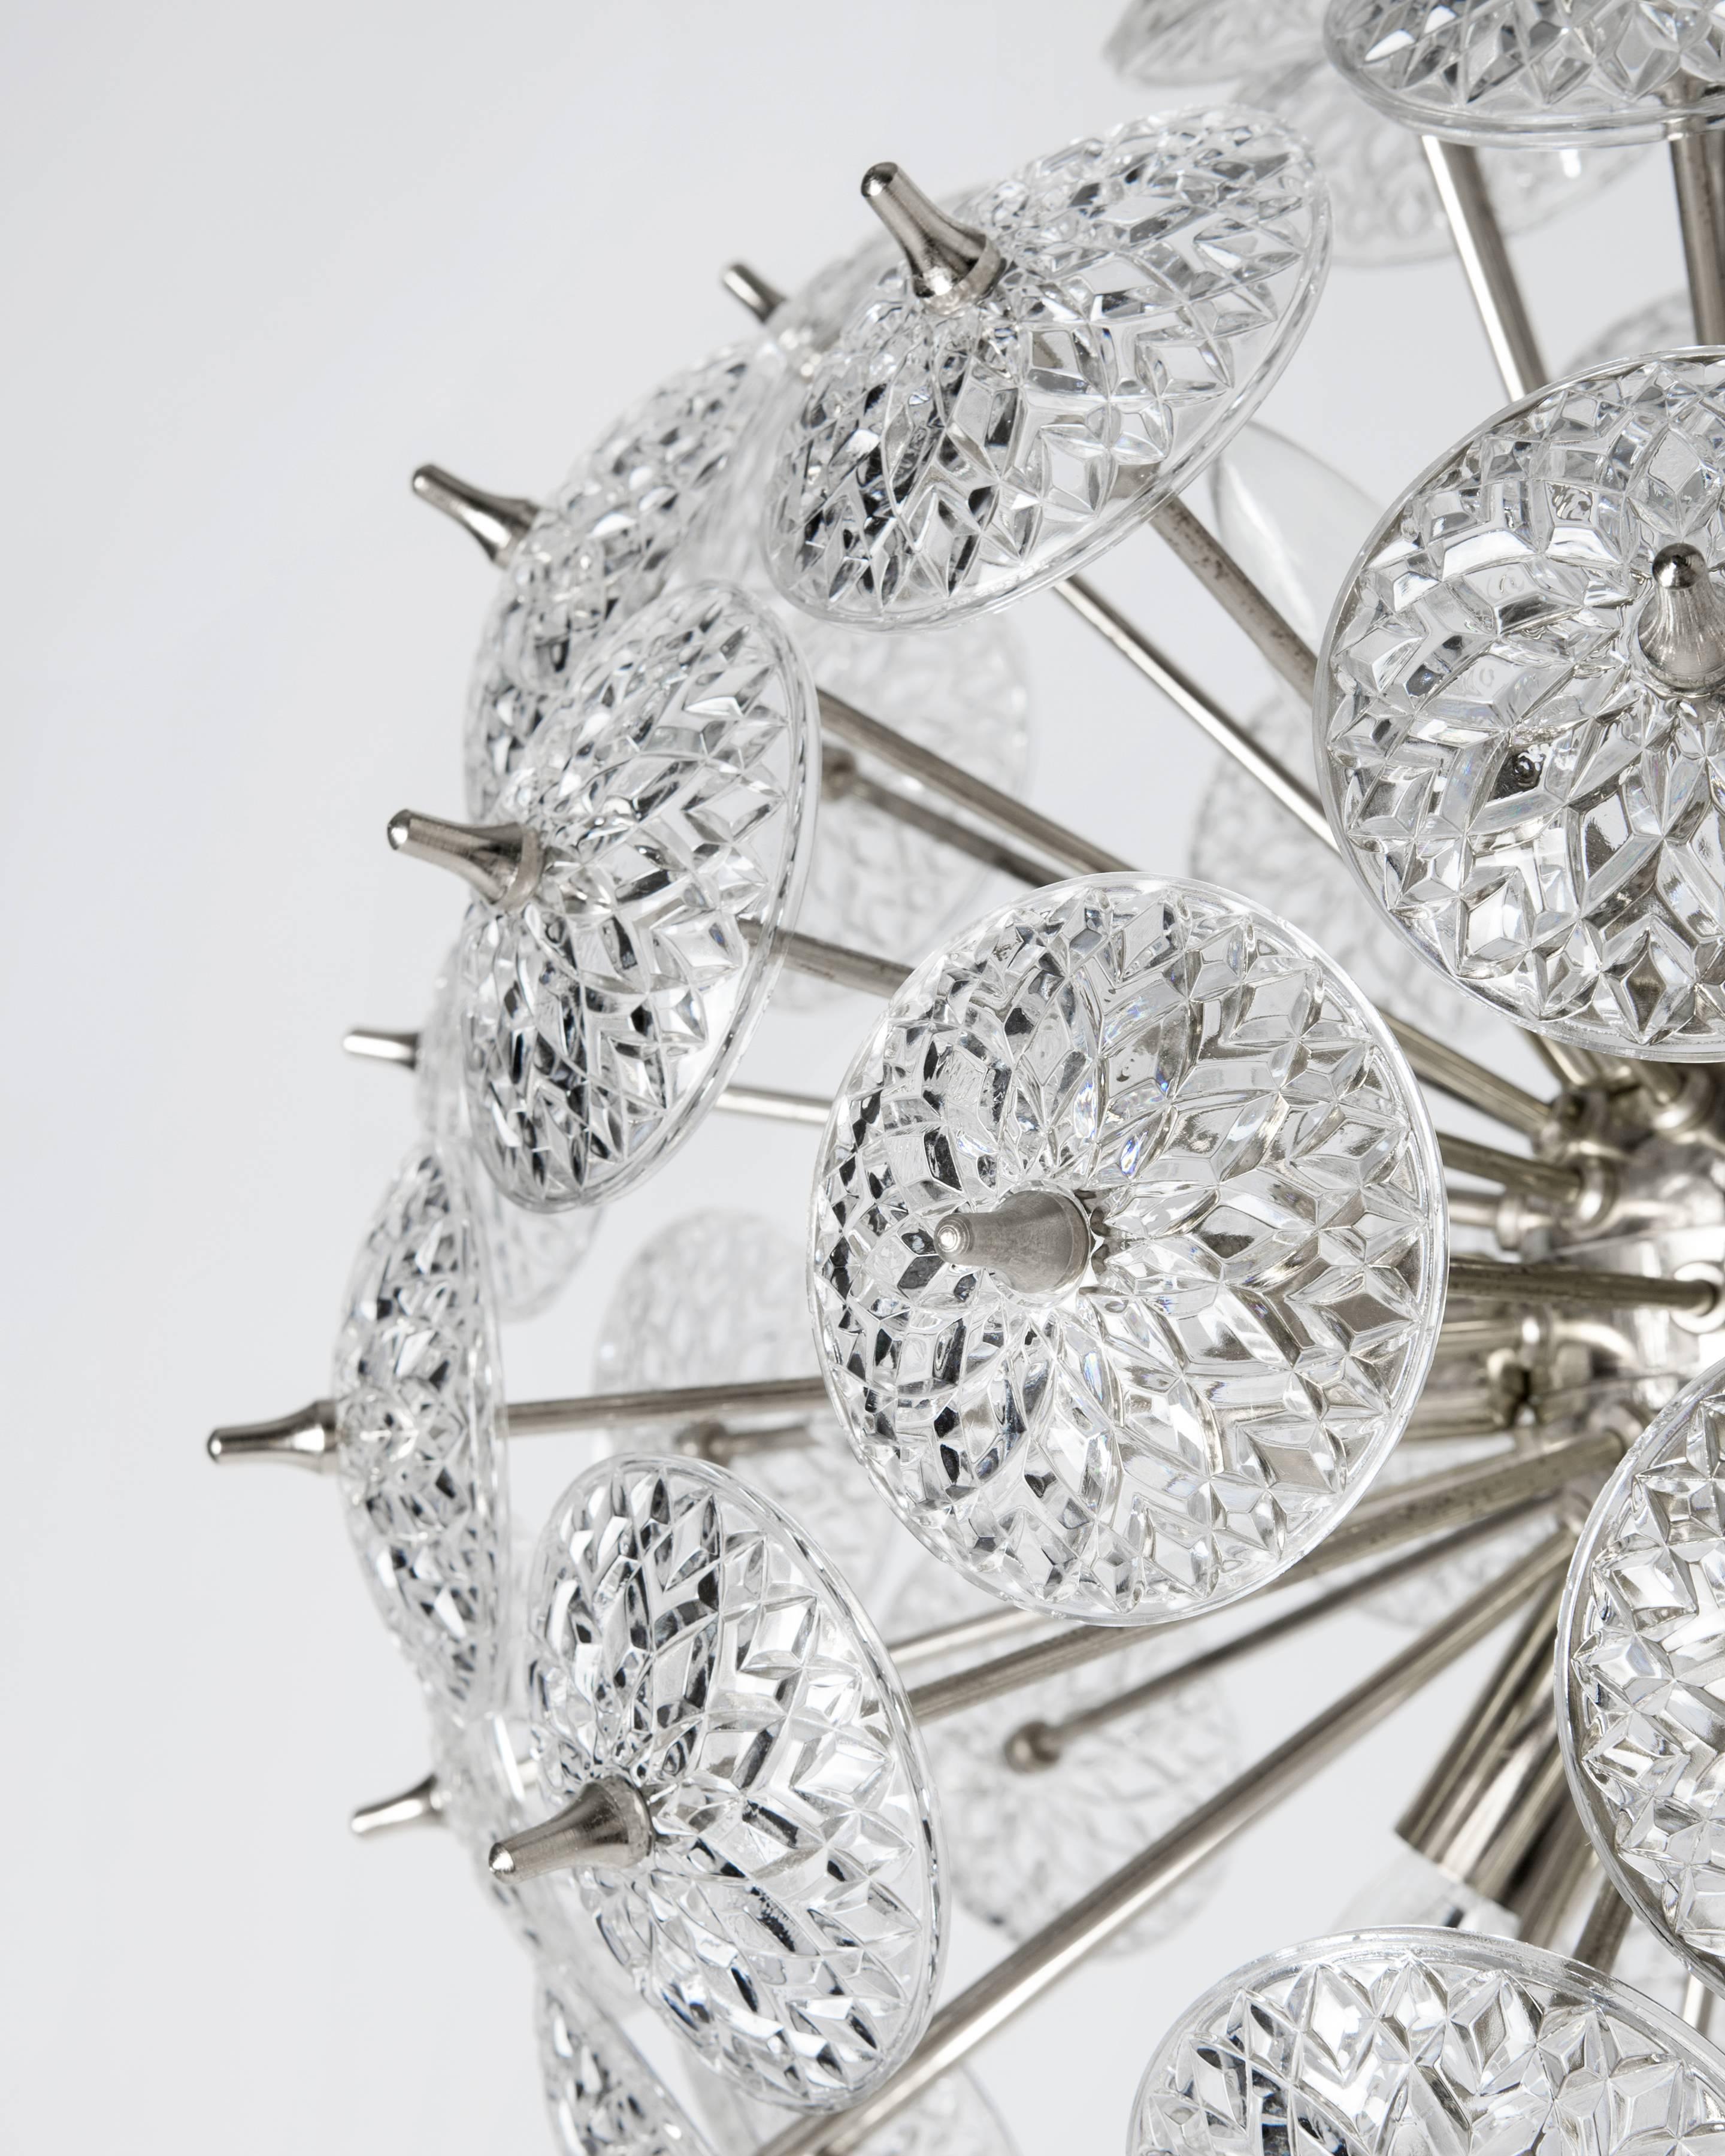 AHL3897

A vintage Sputnik chandelier with textured glass rondelles in its original nickel finish. By the Belgian maker Val Saint Lambert. Due to the antique nature of this fixture, there may be some nicks or imperfections in the glass.